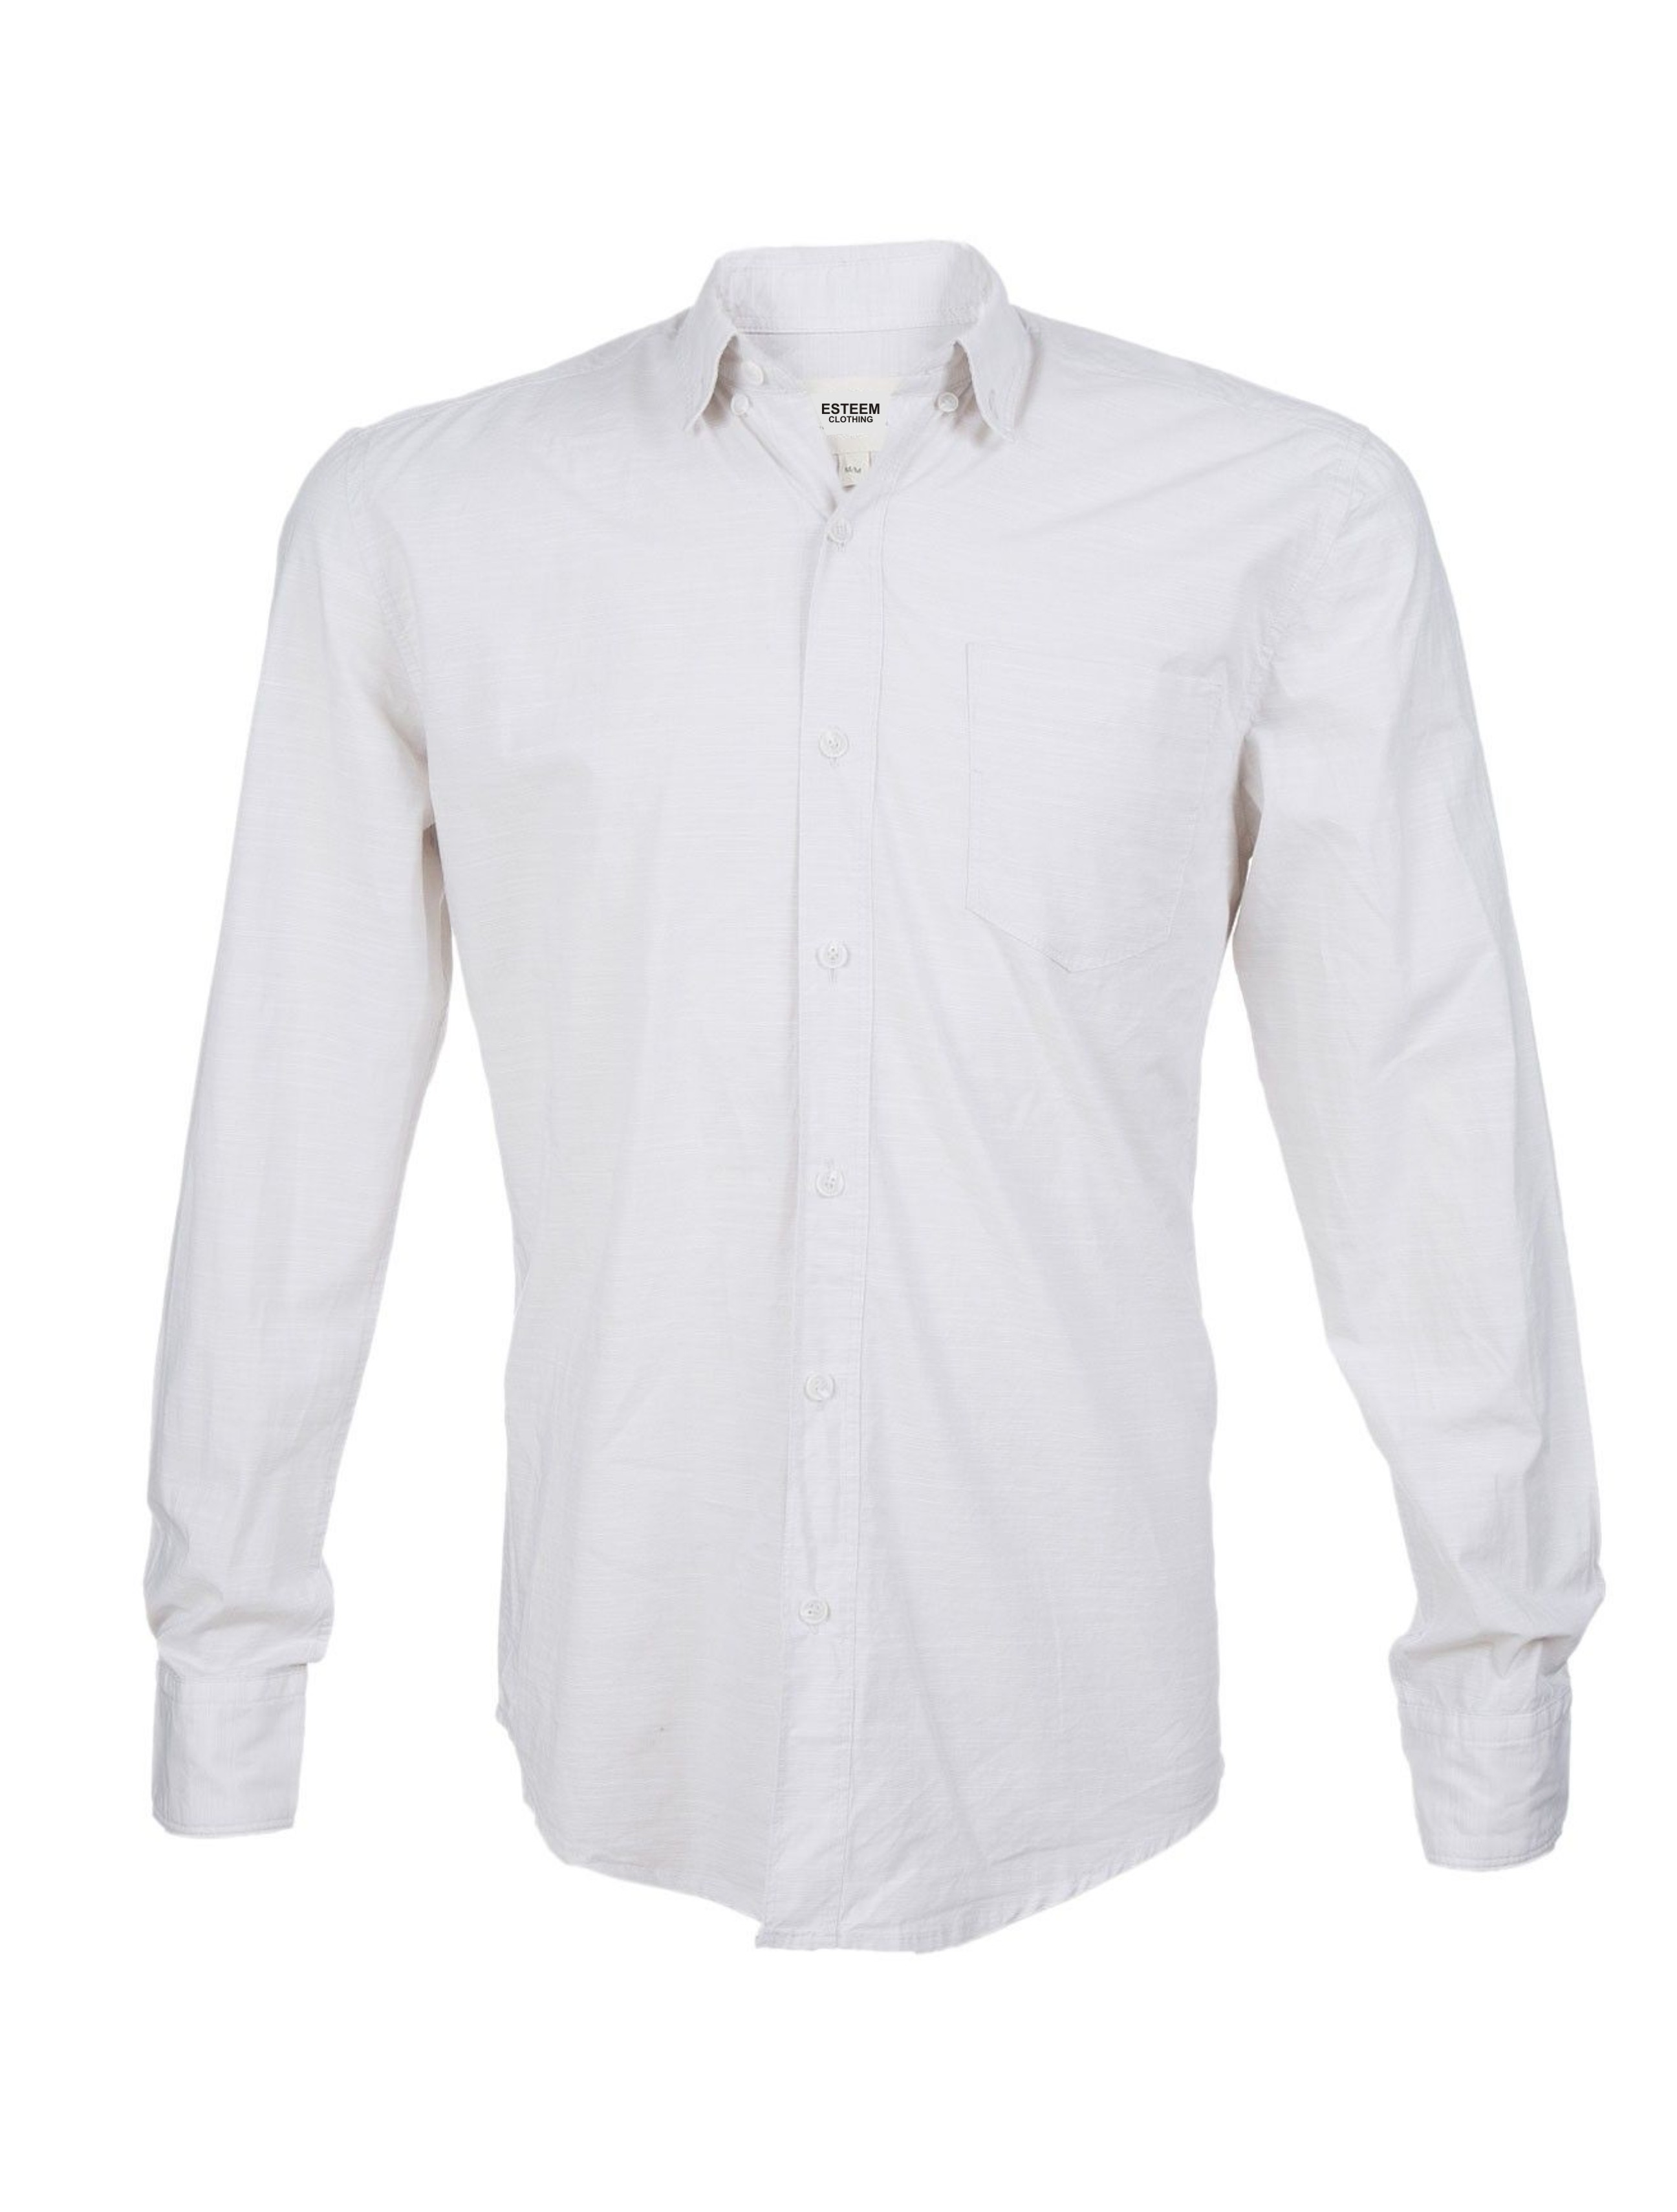 AR-Youth Long sleeve White Oxford shirt with logo